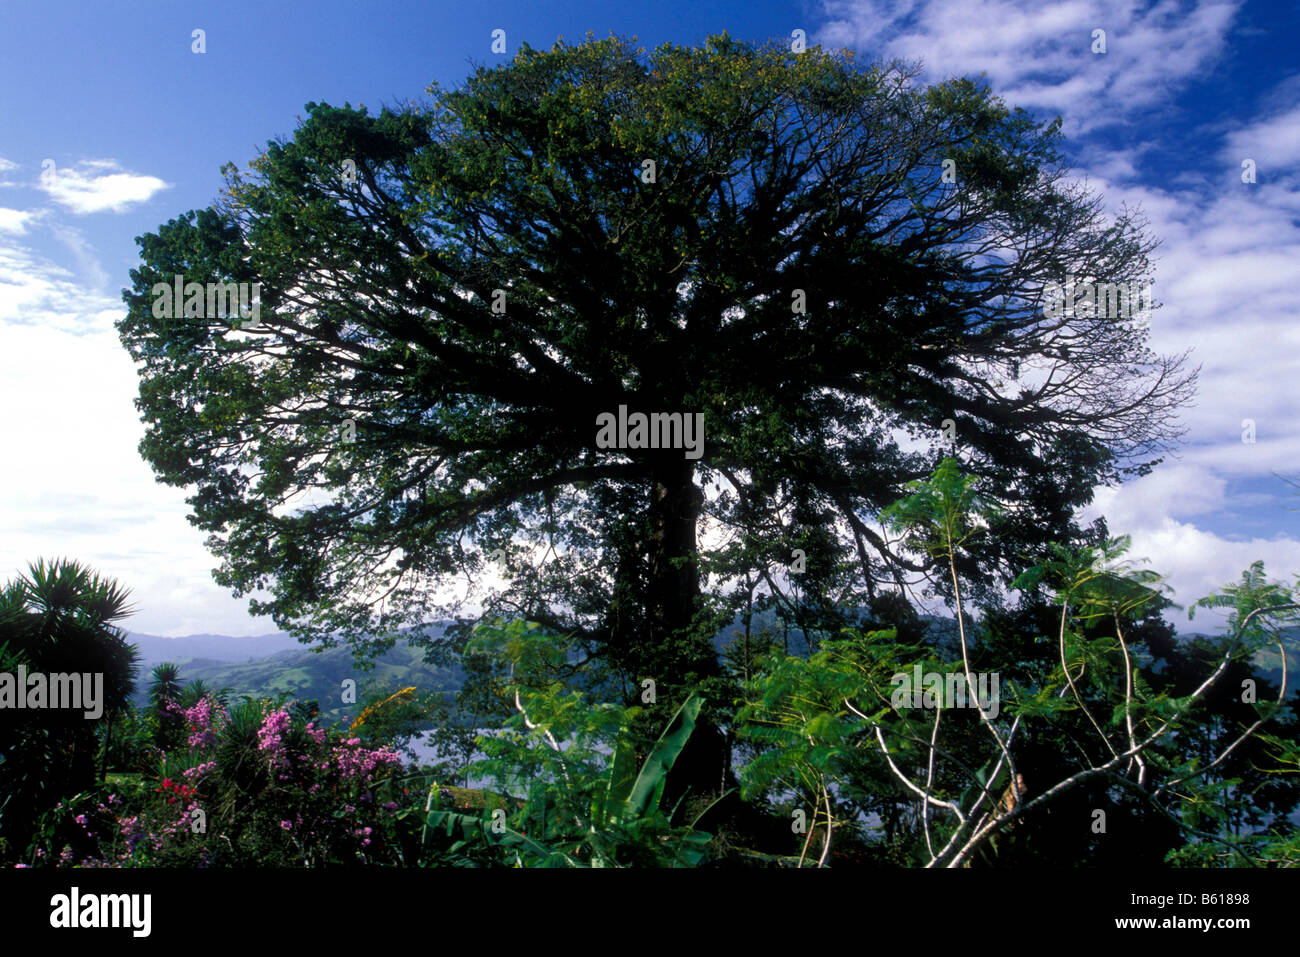 Old ceiba tree, Lake Arenal reservoir, Costa Rica, Central America Stock Photo